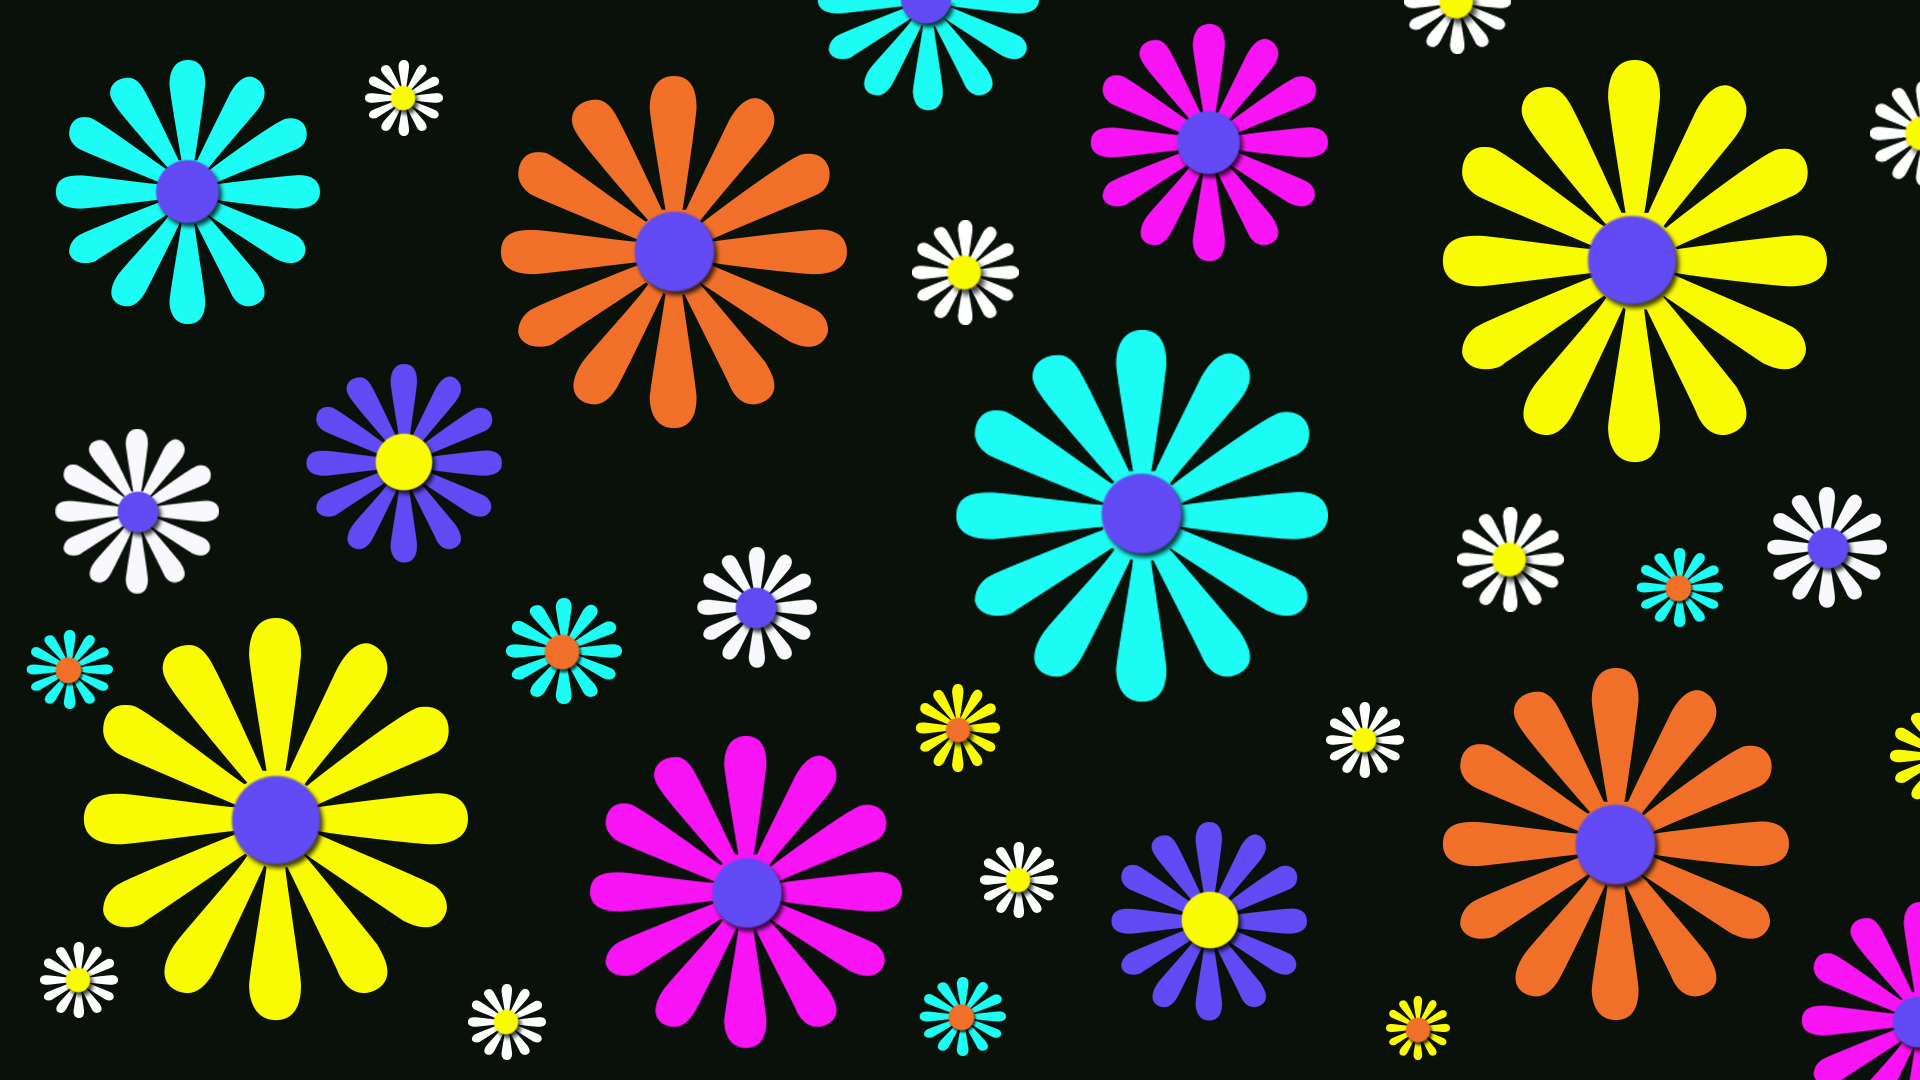 Abstract Artistic Colorful Digital Art Flower Shapes 1920x1080